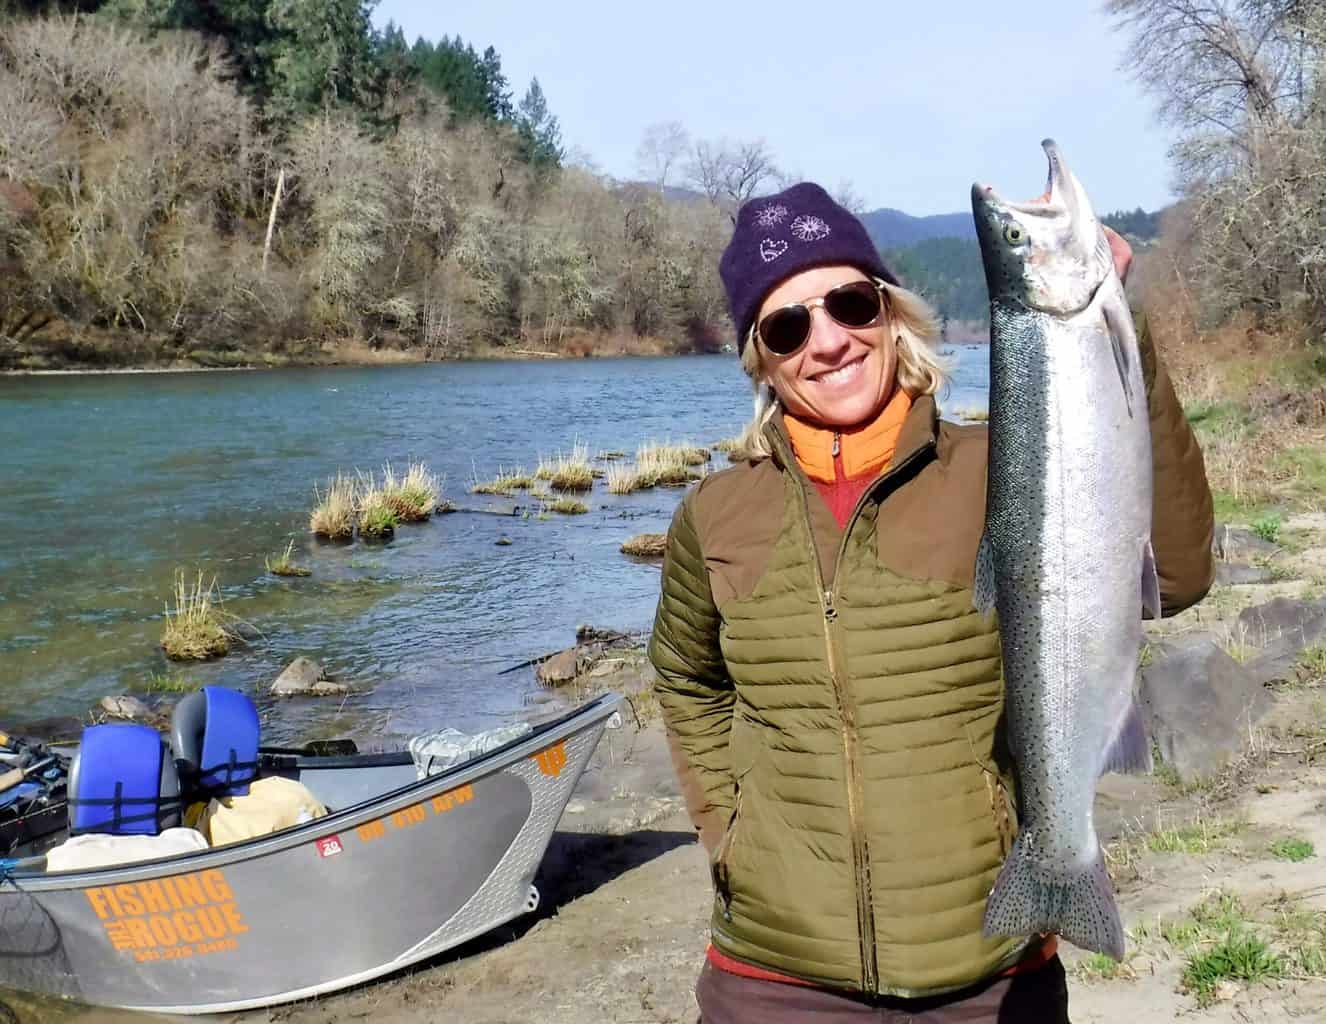 Angler holding a nice steelhead caught while fishing on the rogue river.